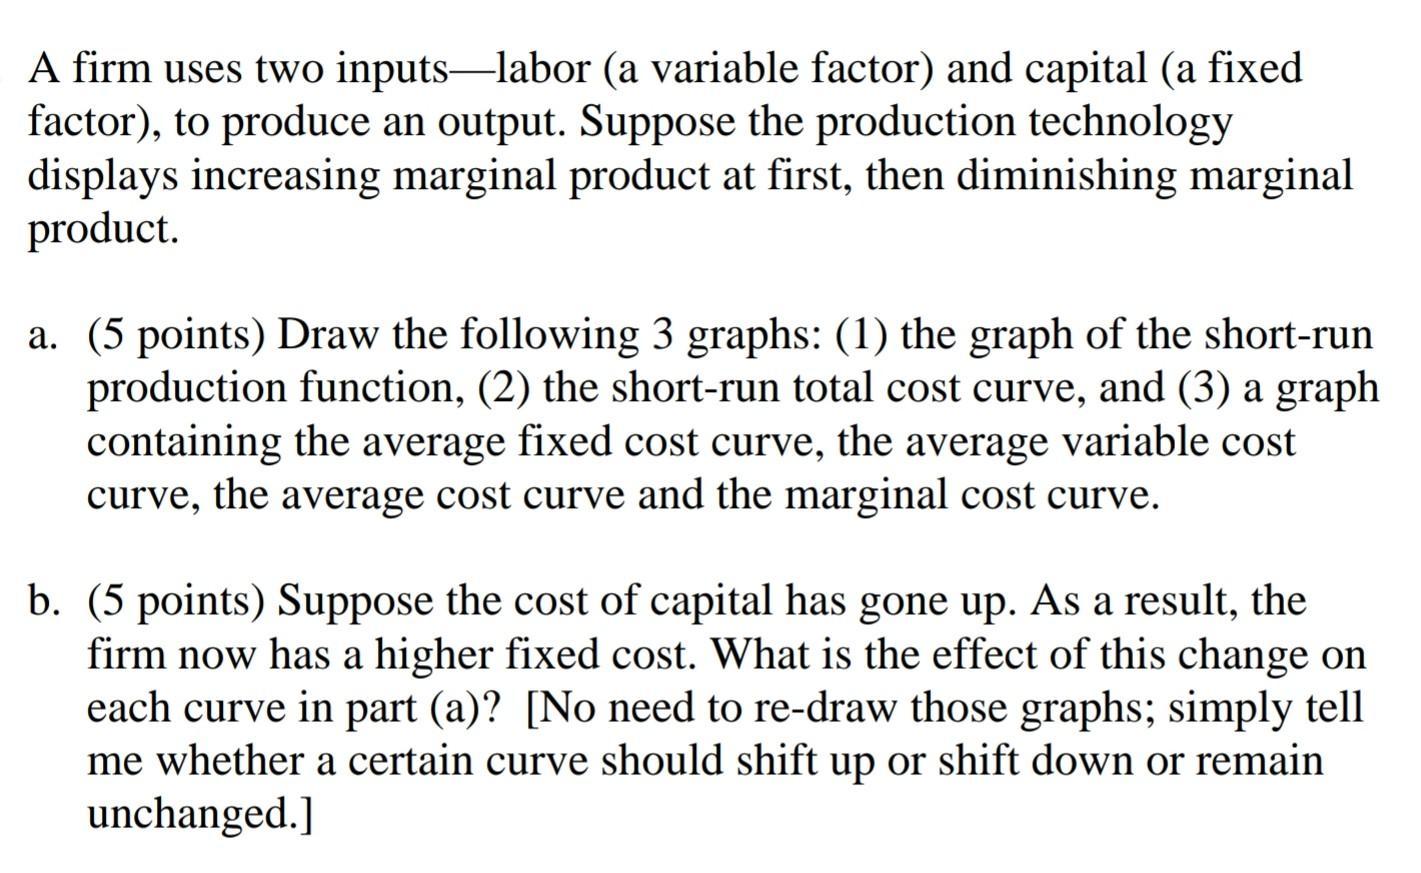 A firm uses two inputs-labor (a variable factor) and capital (a fixed factor), to produce an output. Suppose the production t